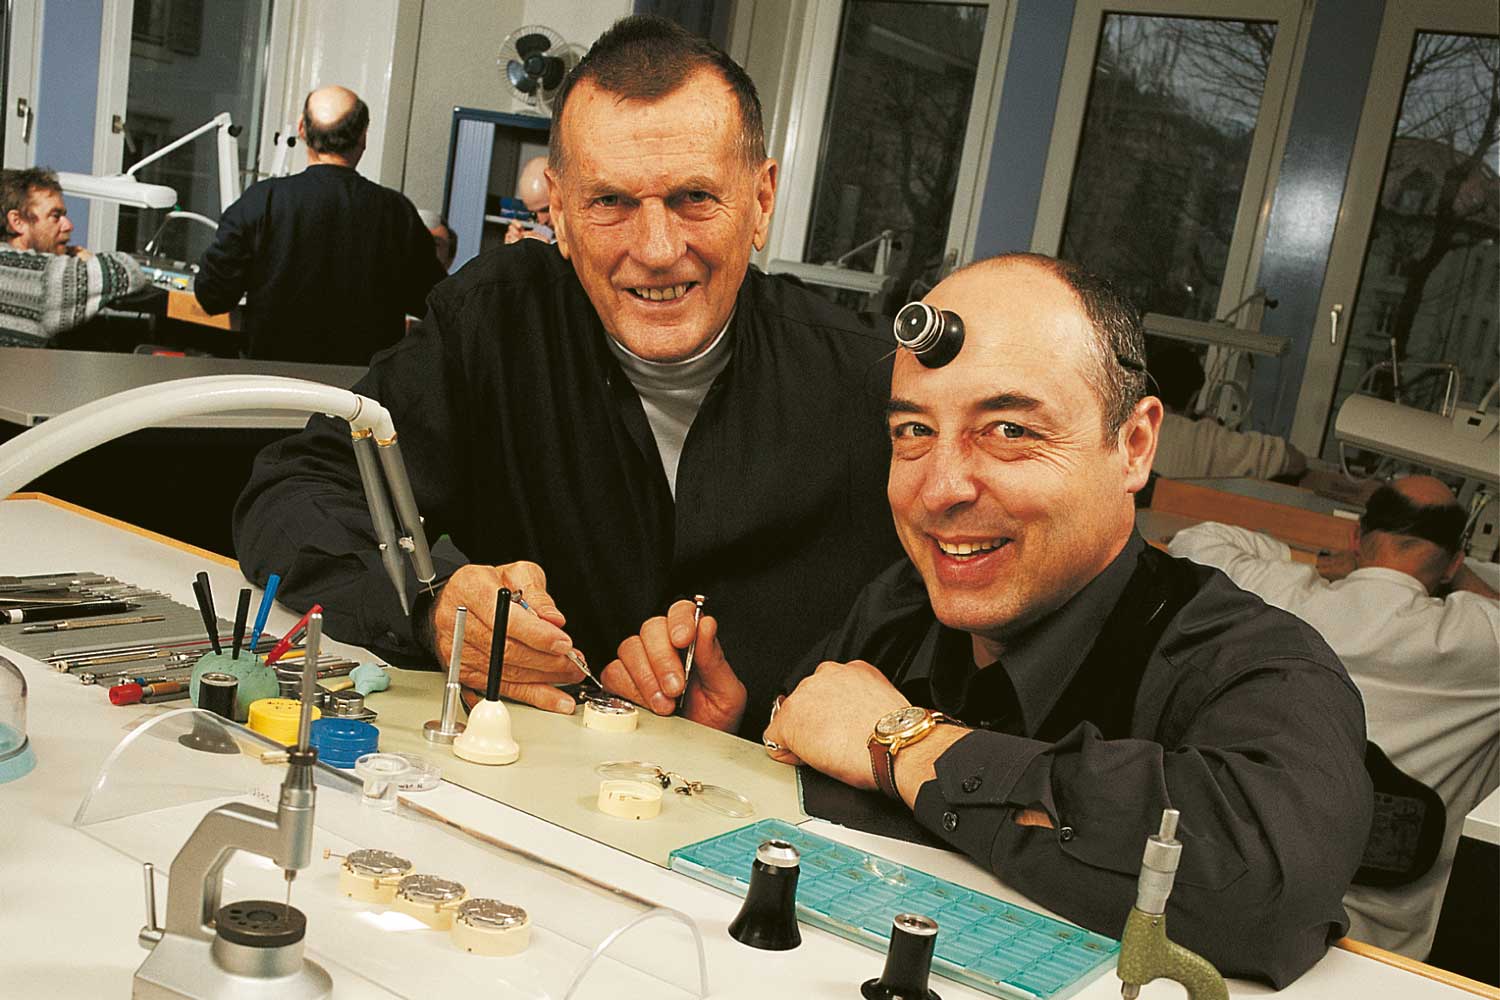 From left: Rolf Schnyder and Dr. Ludwig Oechslin